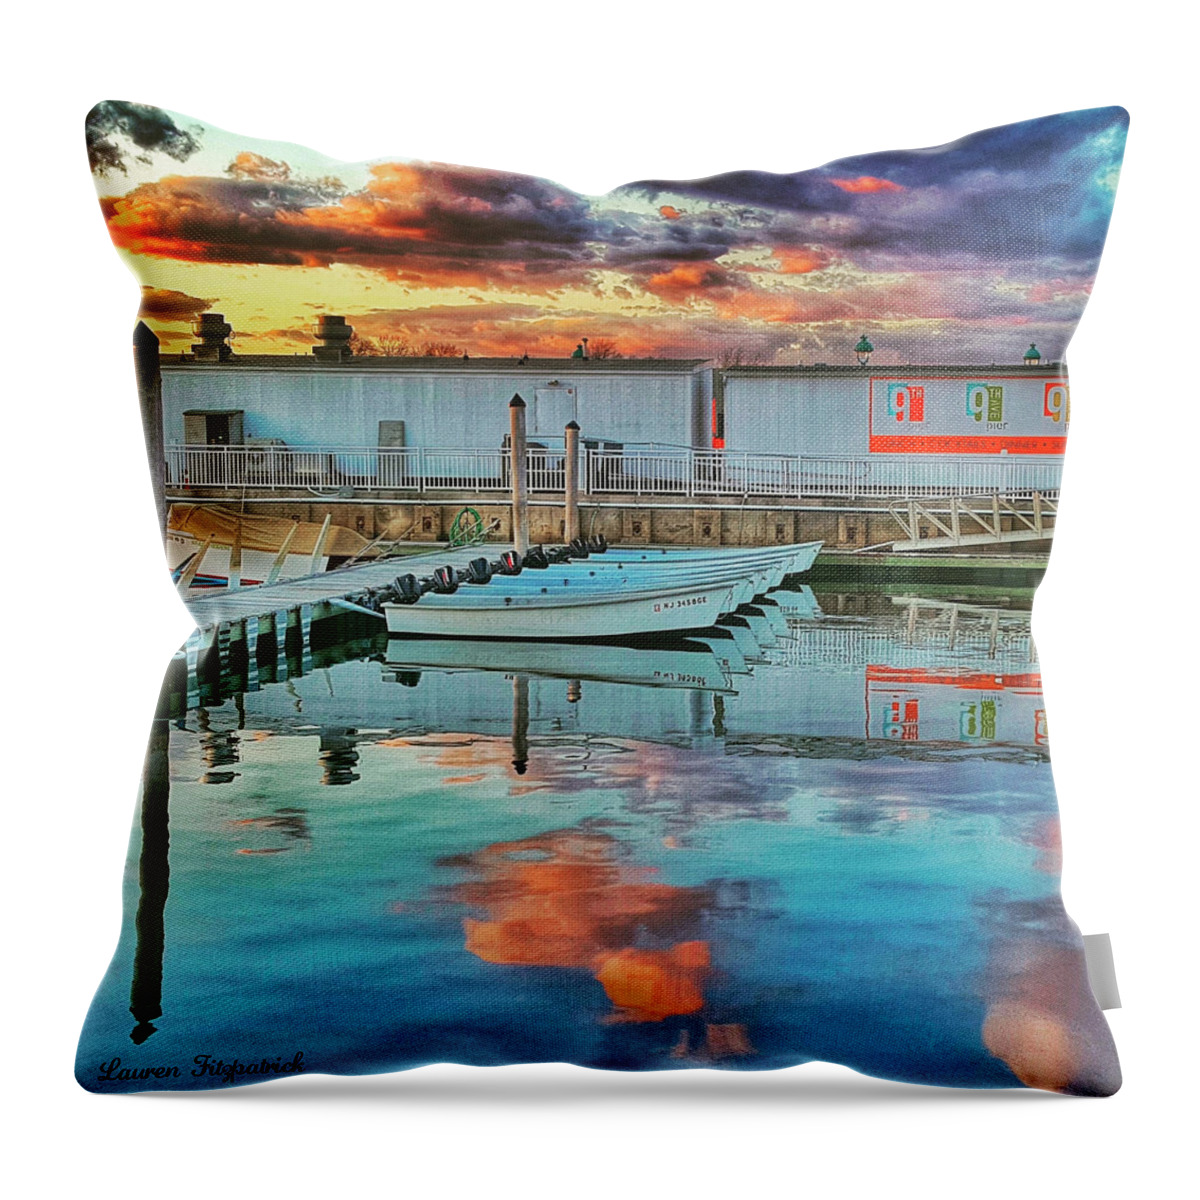 Clouds Throw Pillow featuring the photograph Cloud Reflections by Lauren Fitzpatrick